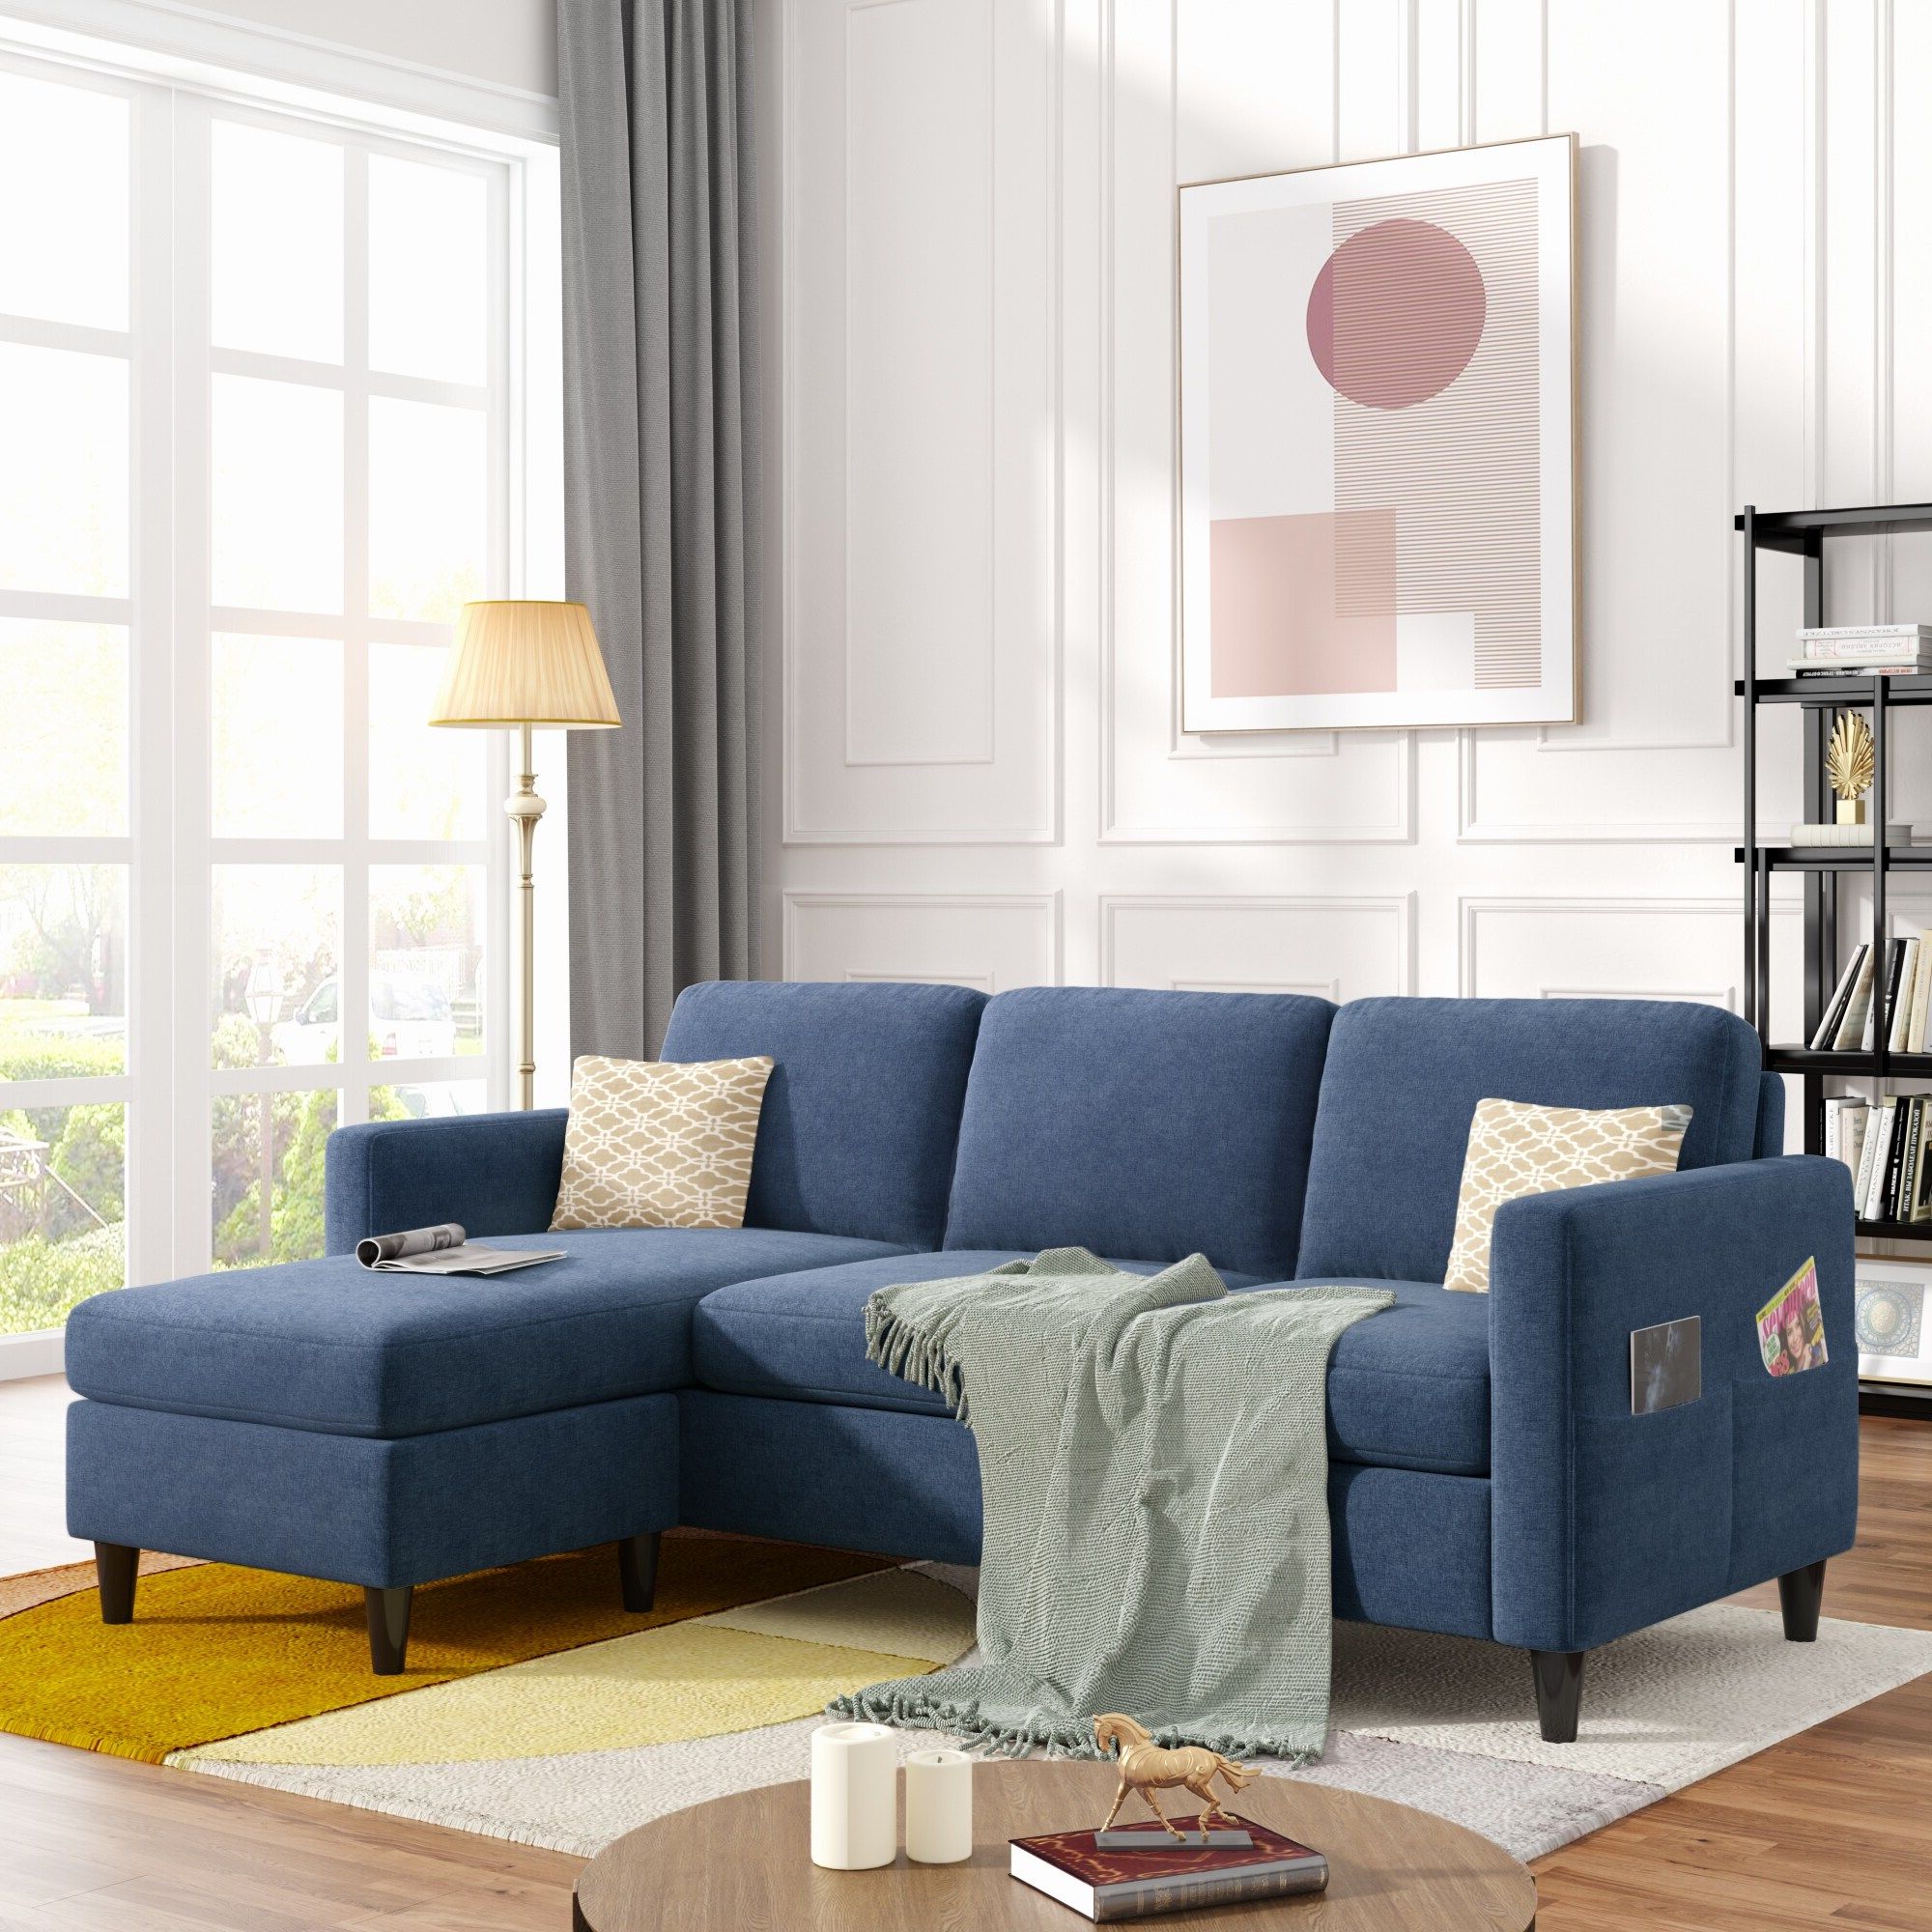 Reversible Sectional Sofa,l Shape 3 Seater Couch With Storage,blue –  Overstock – 37563704 Intended For 3 Seat Sofa Sectionals With Reversible Chaise (Gallery 3 of 20)